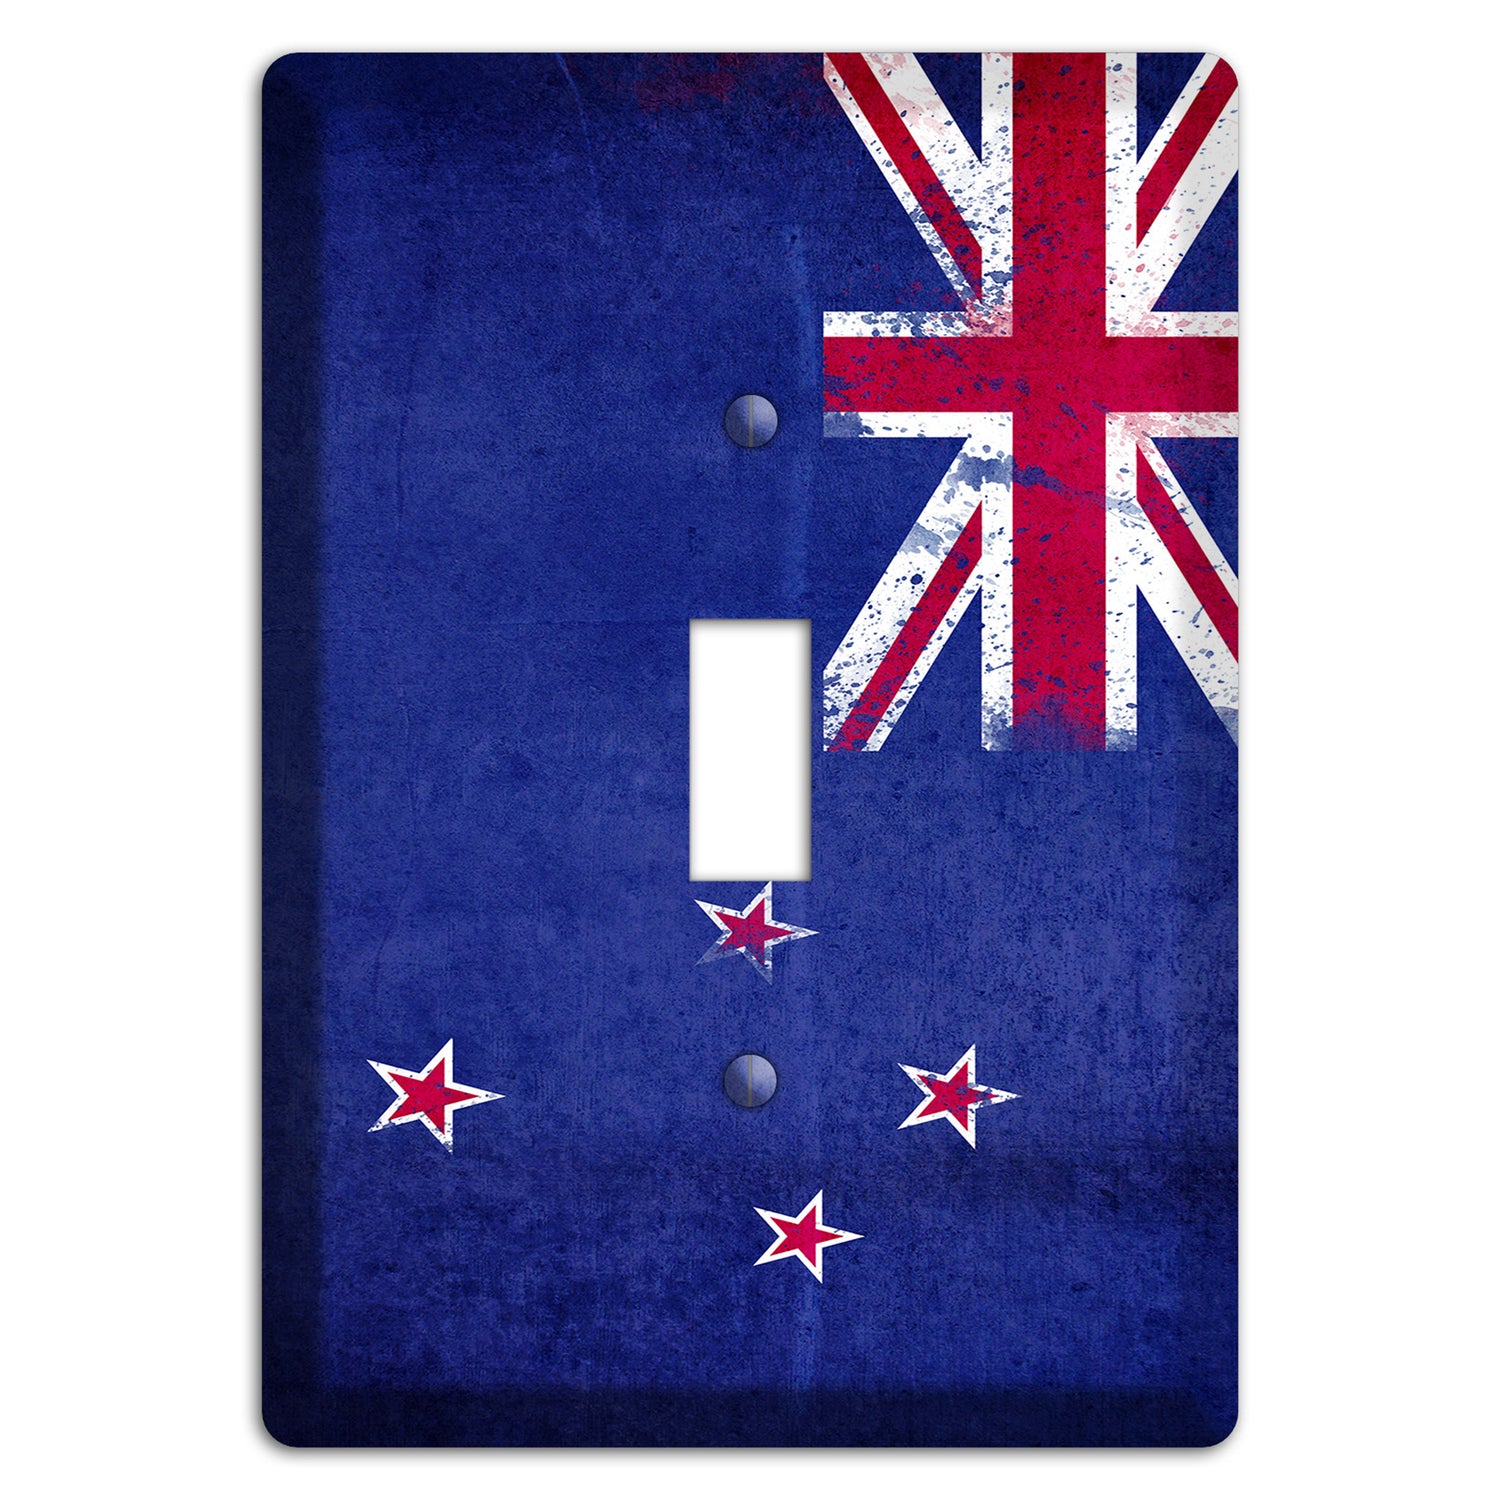 New Zealand Cover Plates